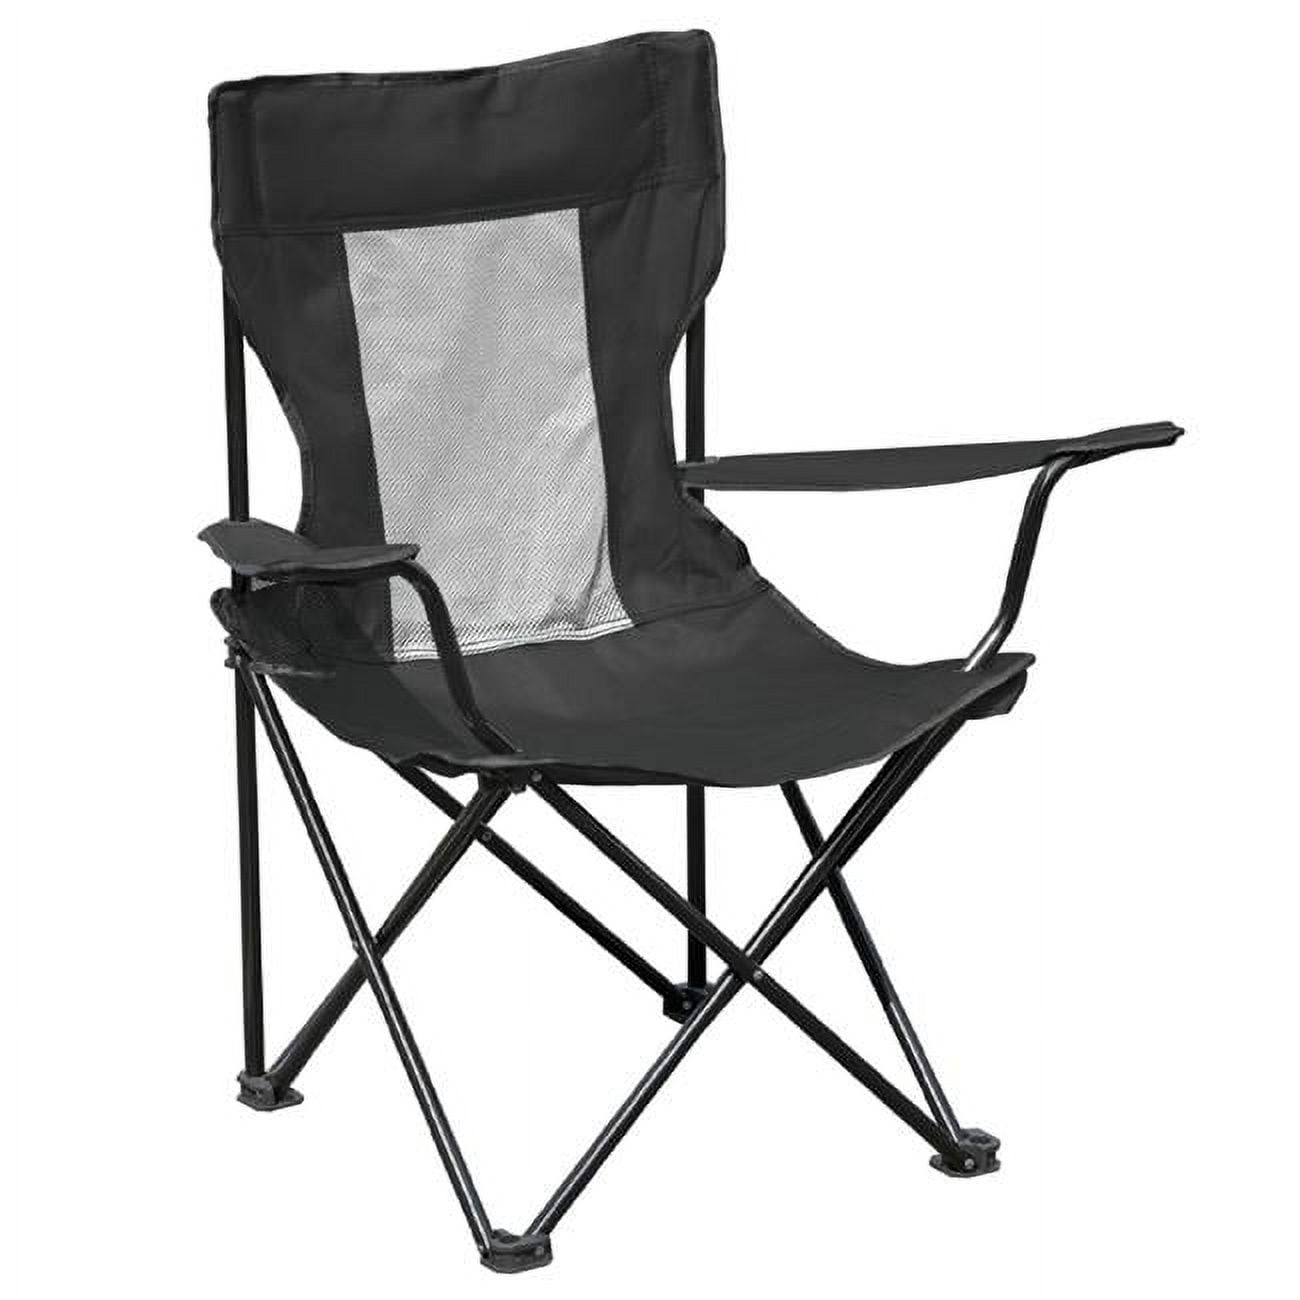 8000625 Quad Folding Chair, Assorted Color - Case Of 6